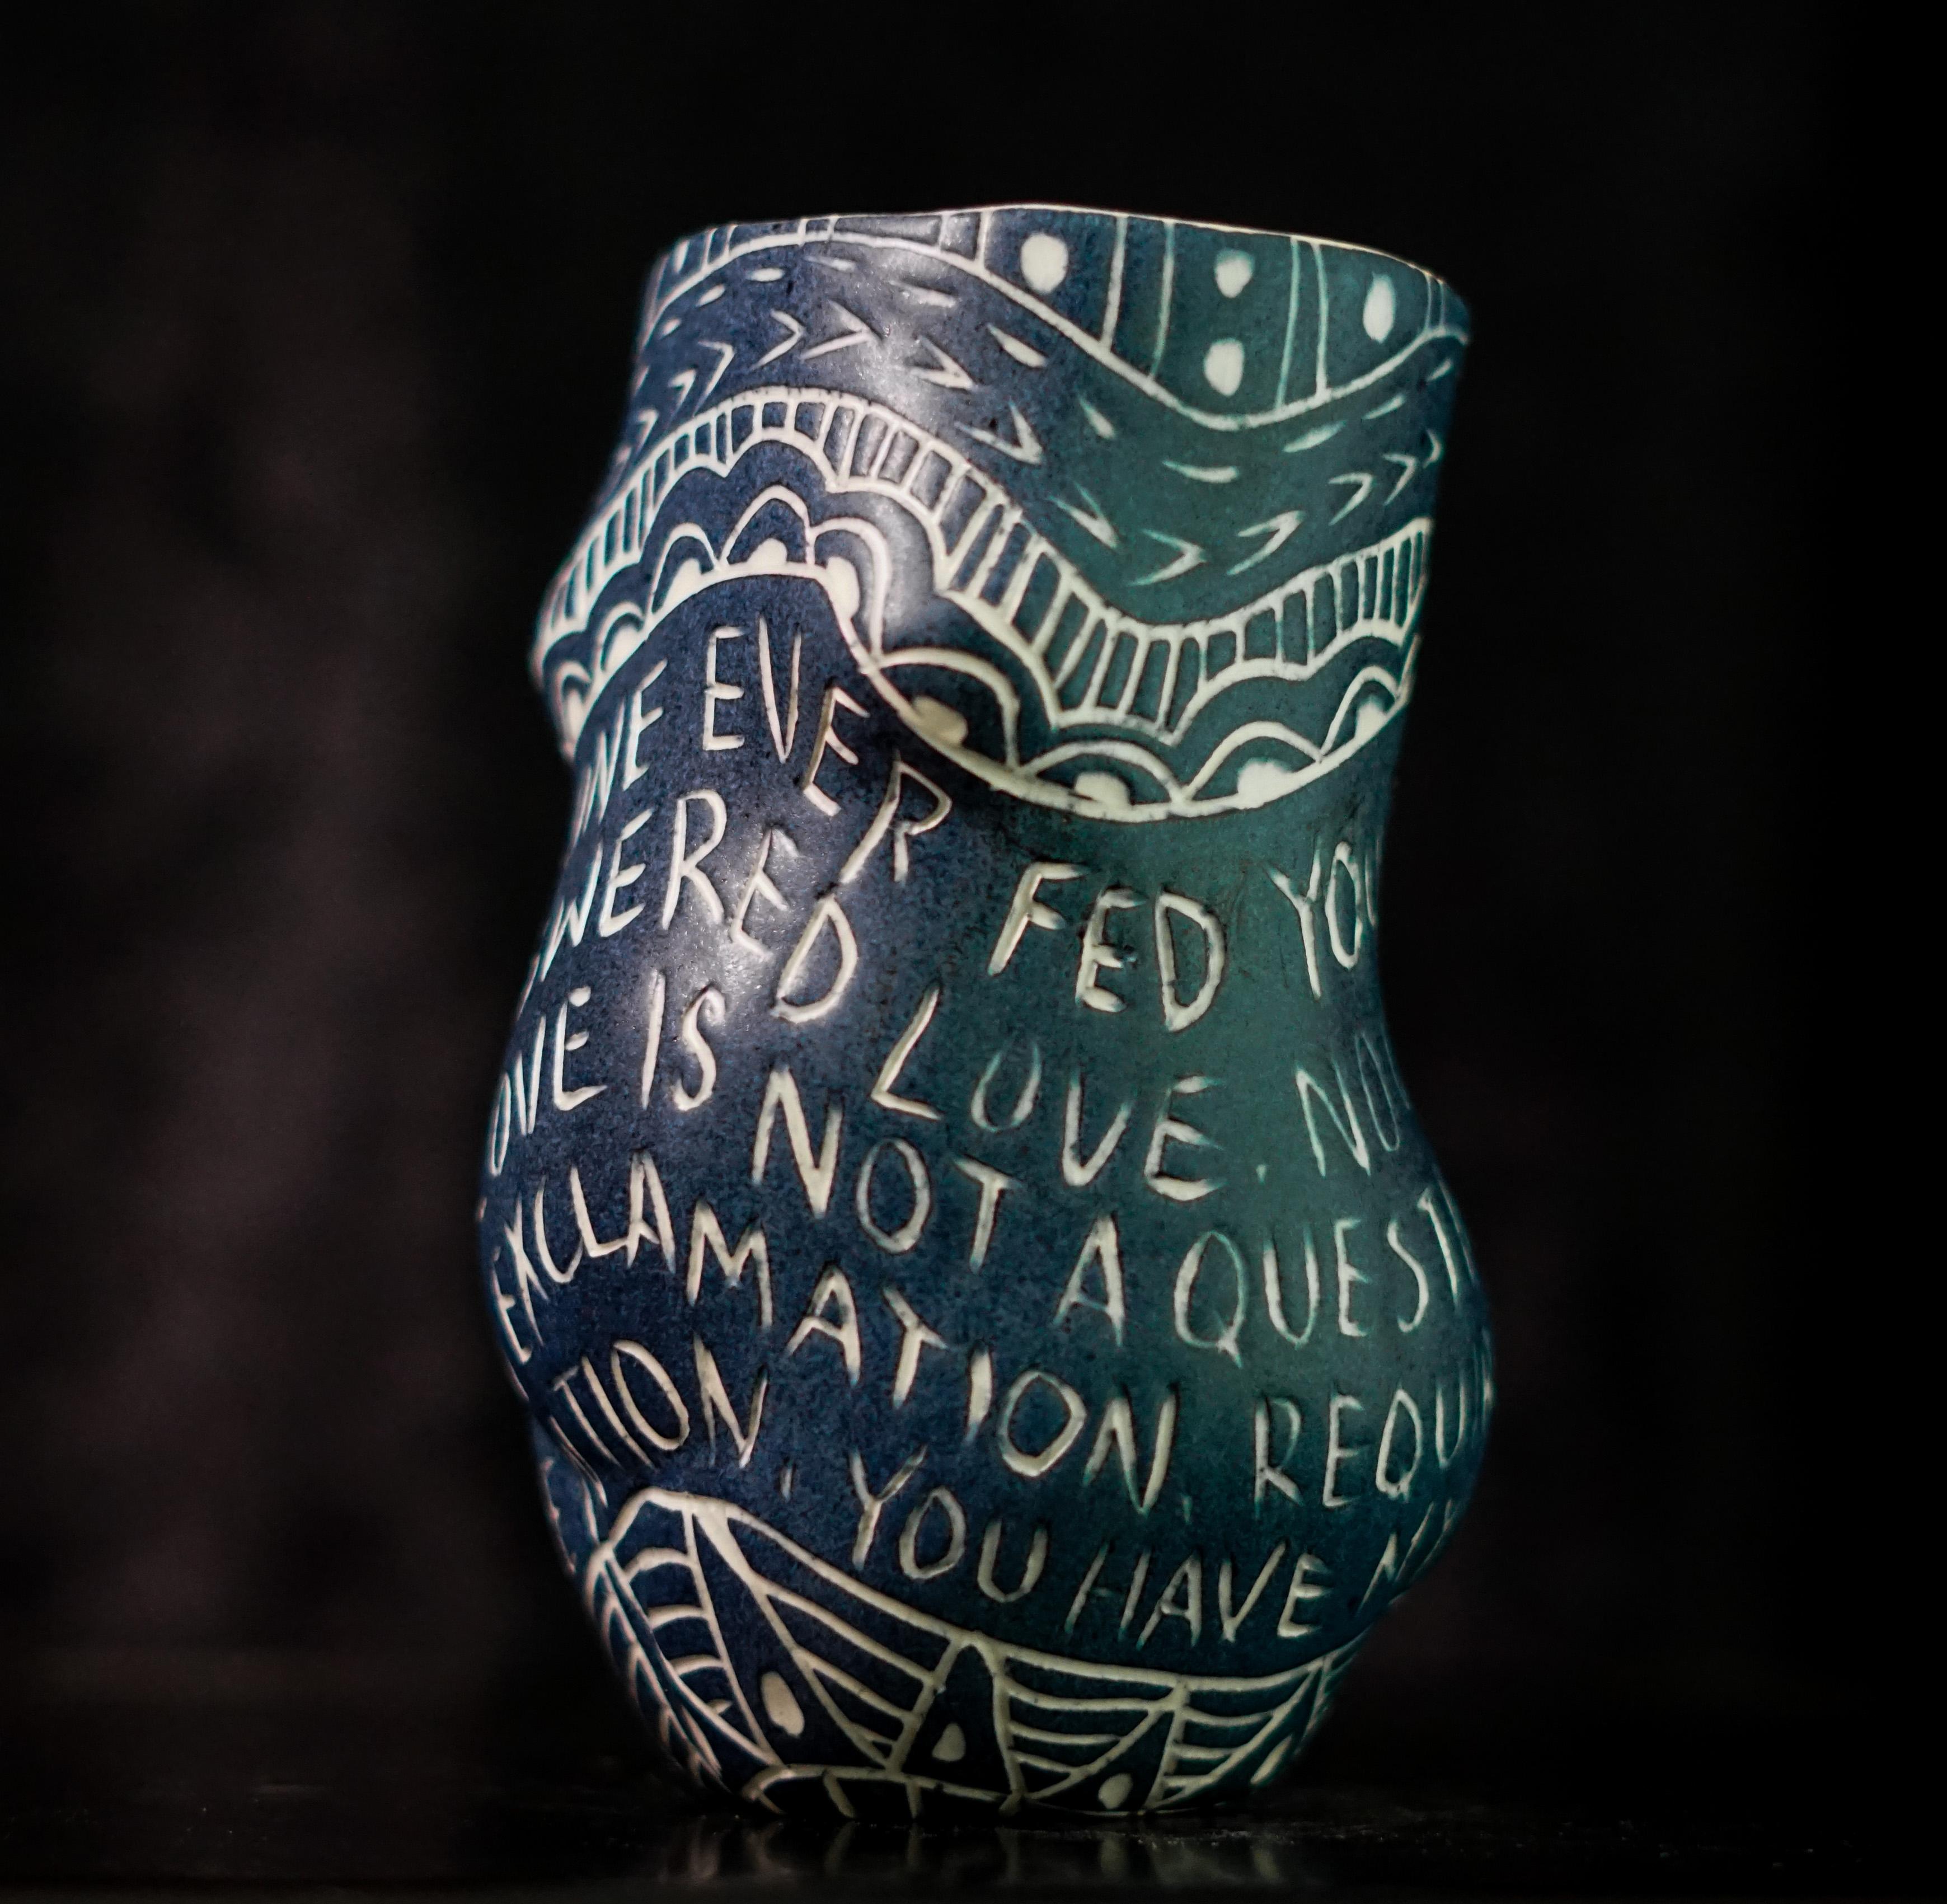 “No One Ever Fed You...” Porcelain cup with sgraffito detailing by the artist - Sculpture by Alex Hodge